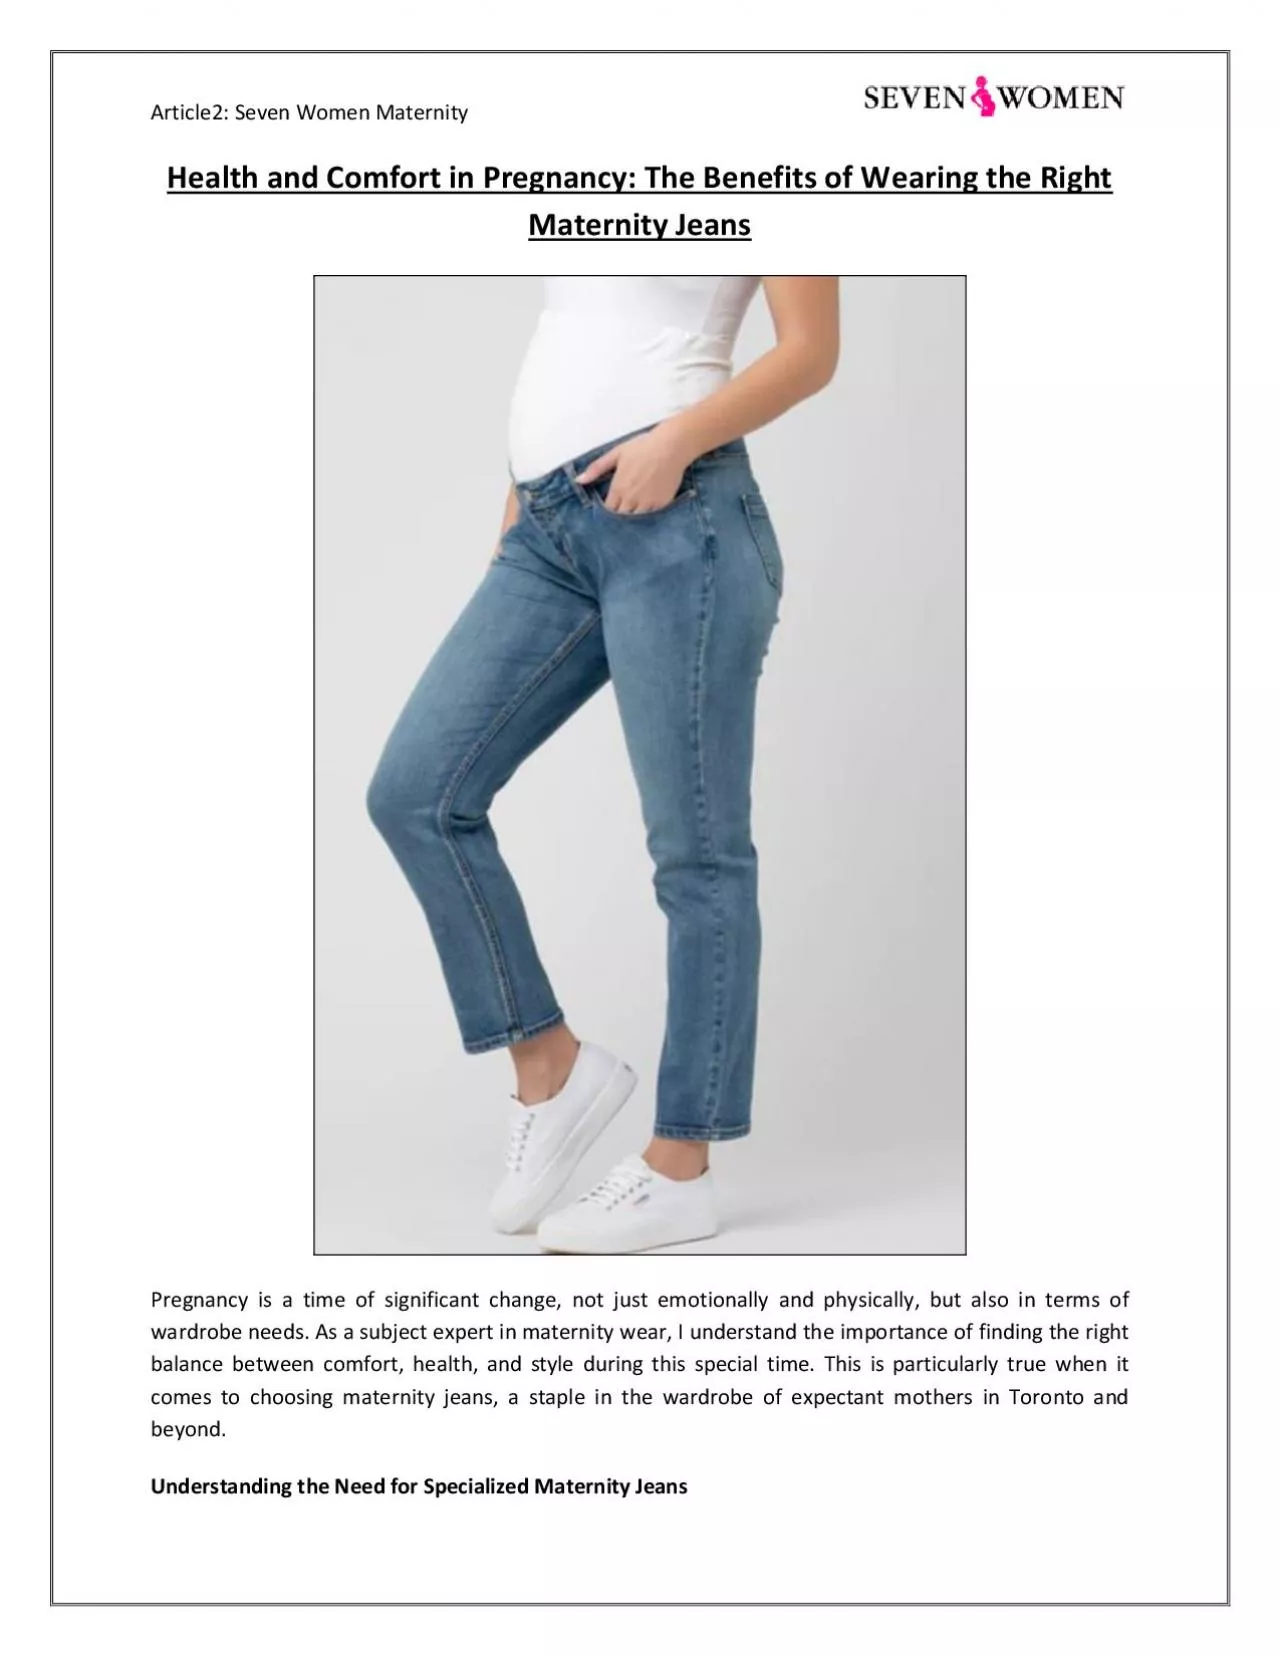 Health and Comfort in Pregnancy: The Benefits of Wearing the Right Maternity Jeans | Seven